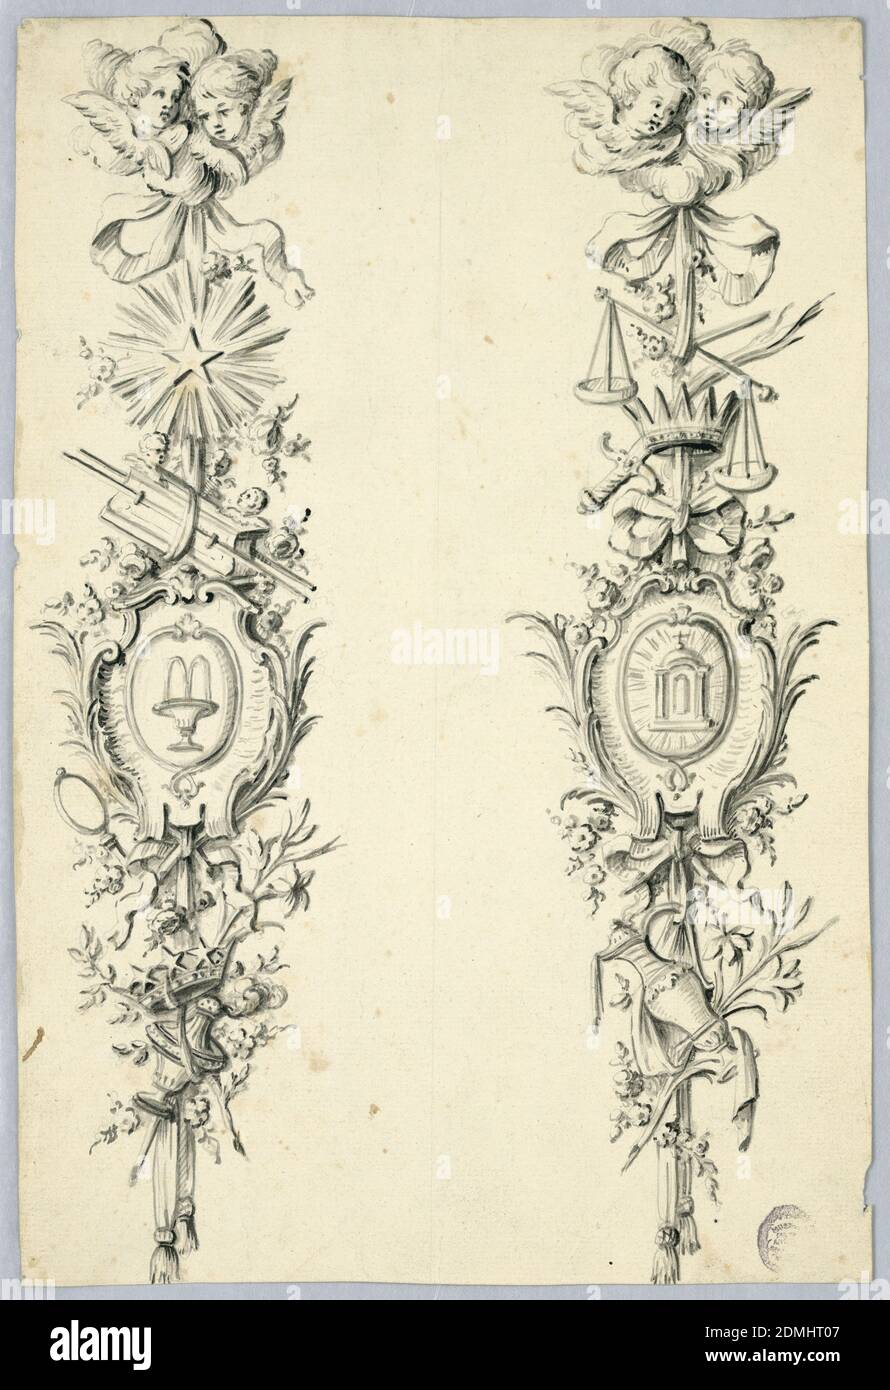 Design for Two Trophies Referring to the Virgin, Graphite, brush and Chinese black on paper, The trophies are suspended from clouds with pairs of cherubim. In the center are escutcheons with the fountain and the tabernacle, respectively. The left one includes furthermore: the star, the Ark of the Covenant, the looking glass, a star crown, a censer, a lily spray. The right one includes: a paif of scales and a sword, a cross, a pitcher, a lily spray., France, 1750–1780, Drawing Stock Photo